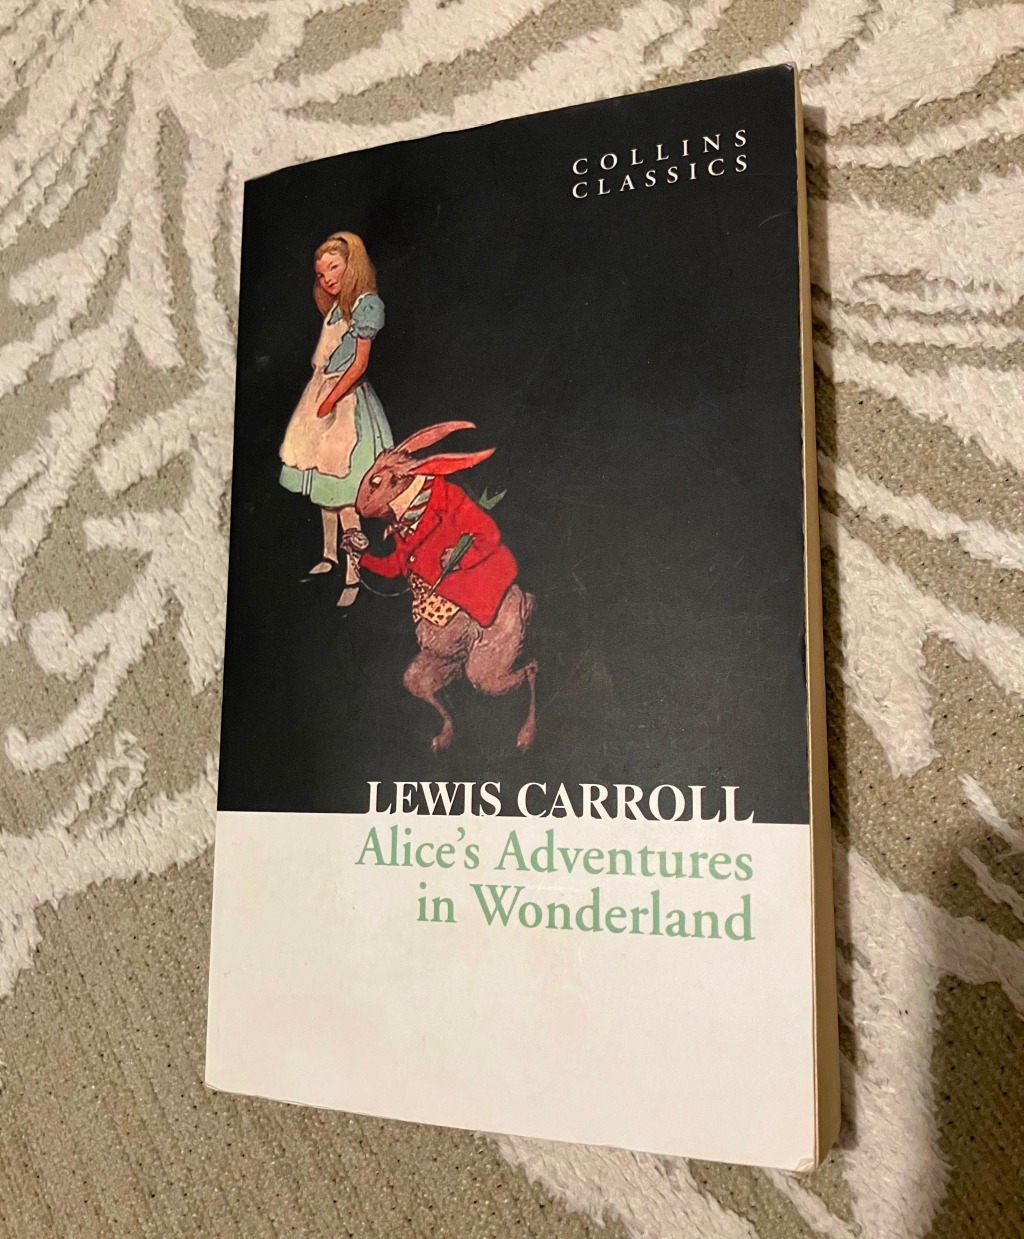 Book of the Month, February: Alice’s Adventures in Wonderland 📚 🐇